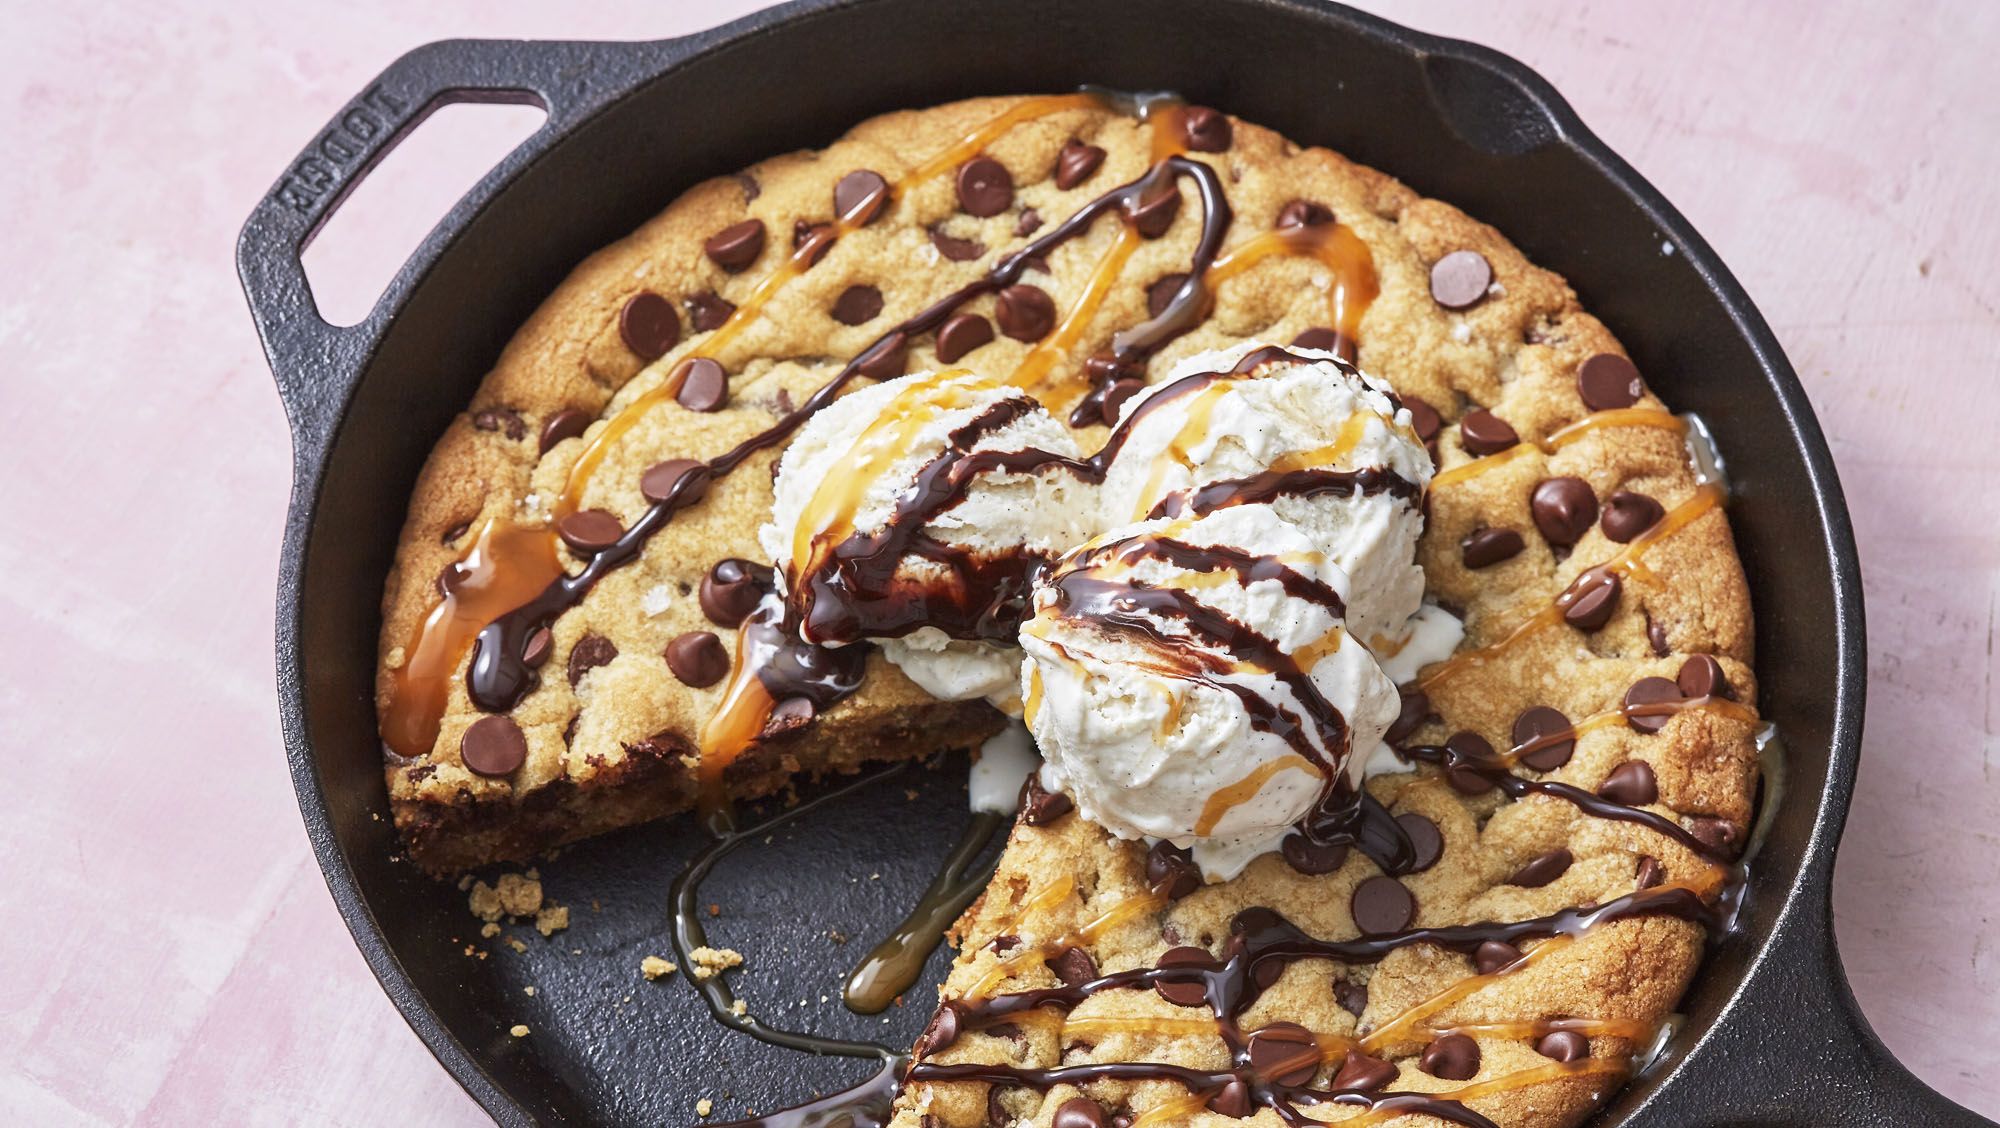 Skillet Chocolate Chip Cookie Recipe - Easy Chocolate Chip Skillet Cookie